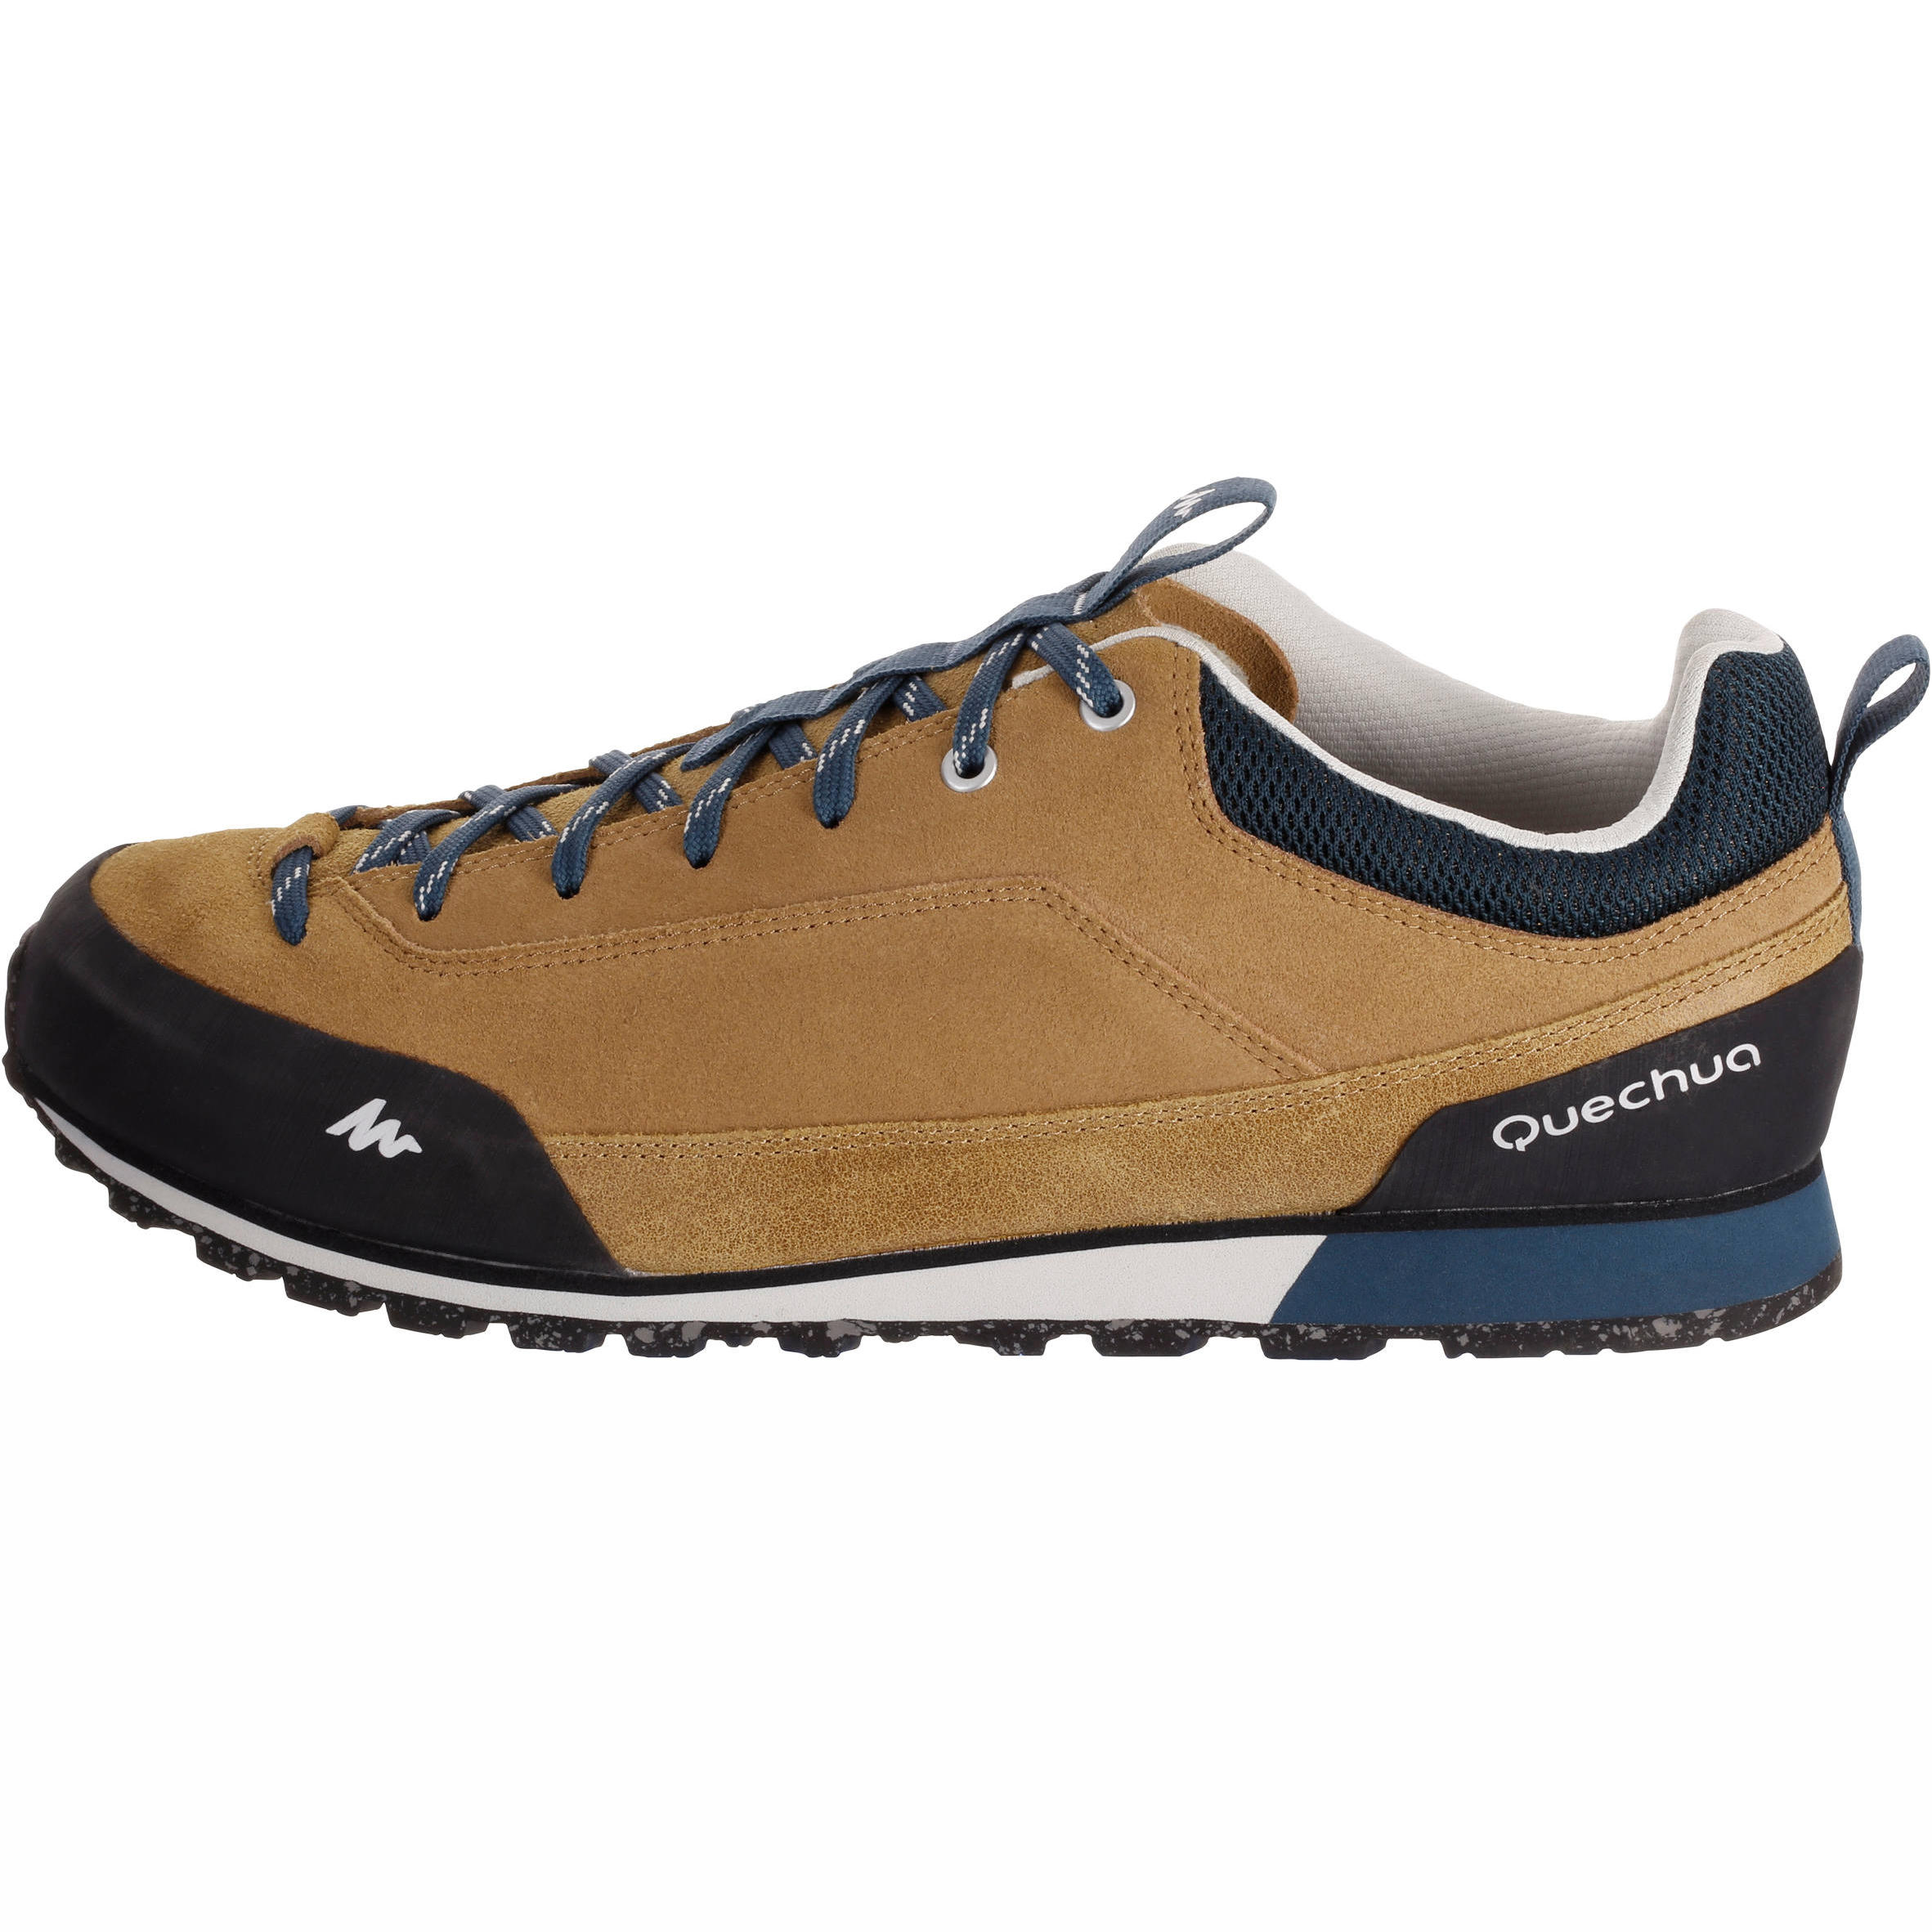 NH500 Men's Country Walking Shoes - Beige